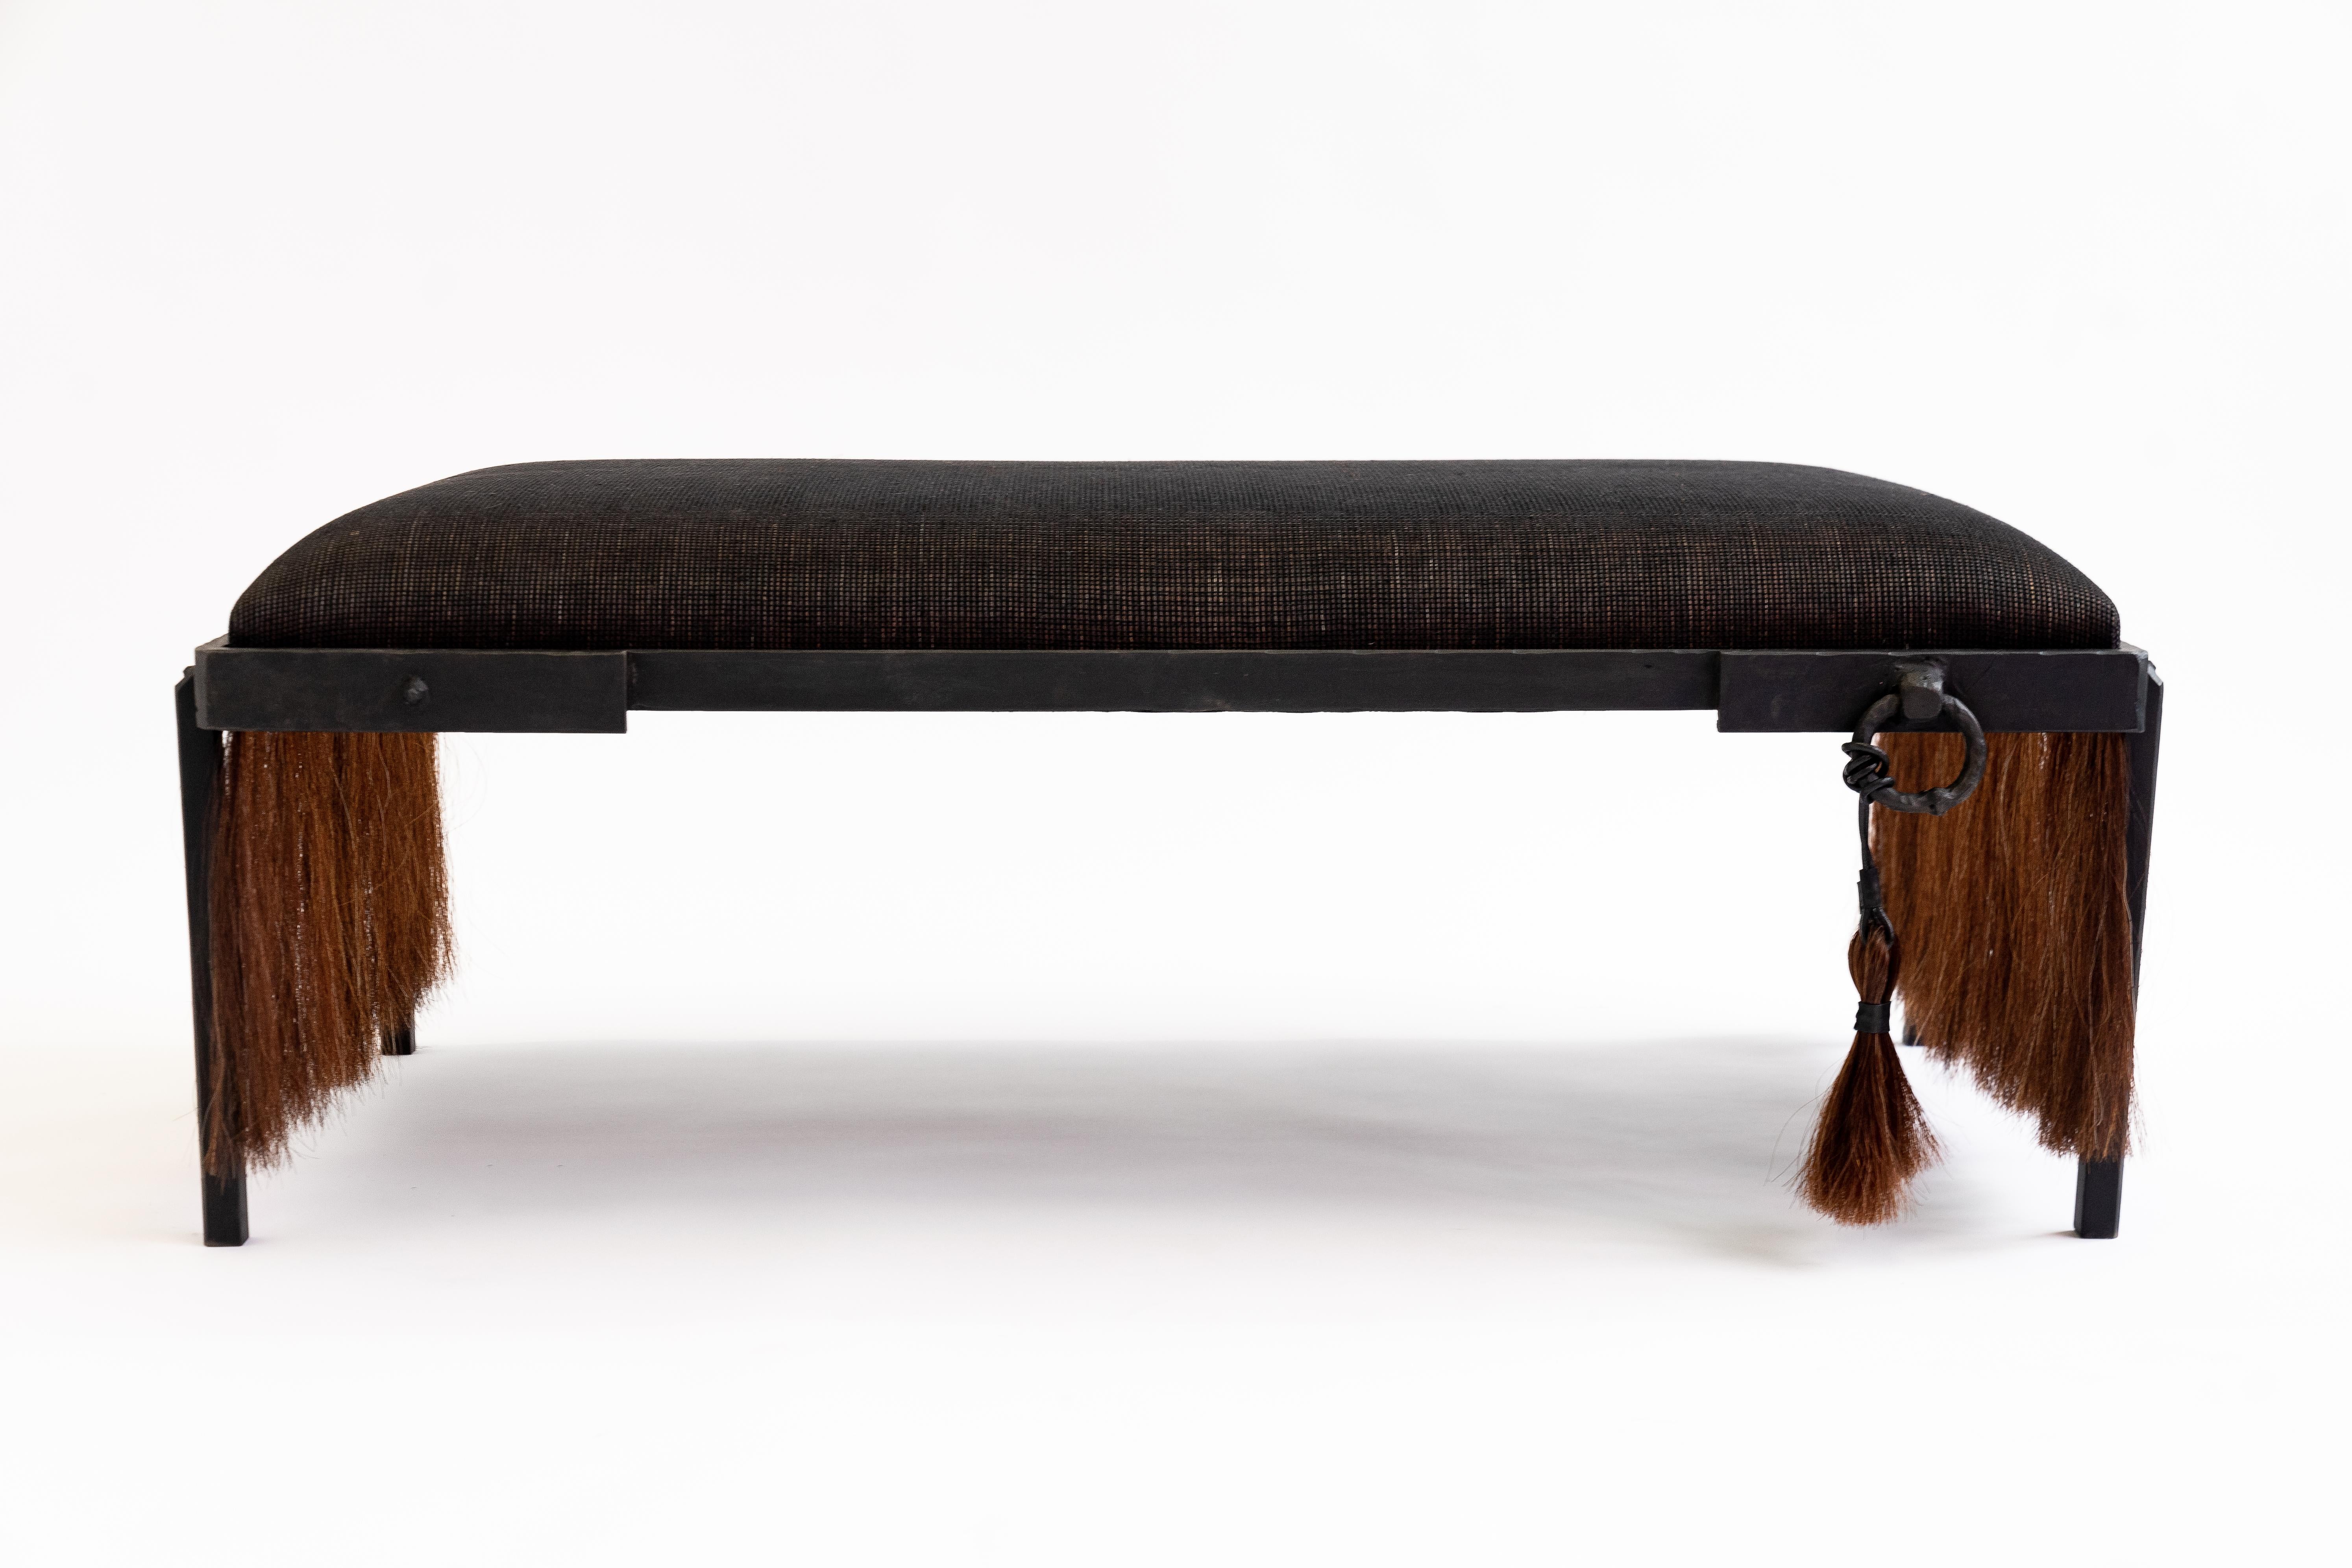 HORSE HAIR BENCH NO. 1 - BROWN
J.M. Szymanski 
d. 2019

Contemporary furniture at its finest. Horsehair textile and blackened iron are combined to create an exciting juxtaposition of elements. 

Available in creme, brown, and black. Custom sizes